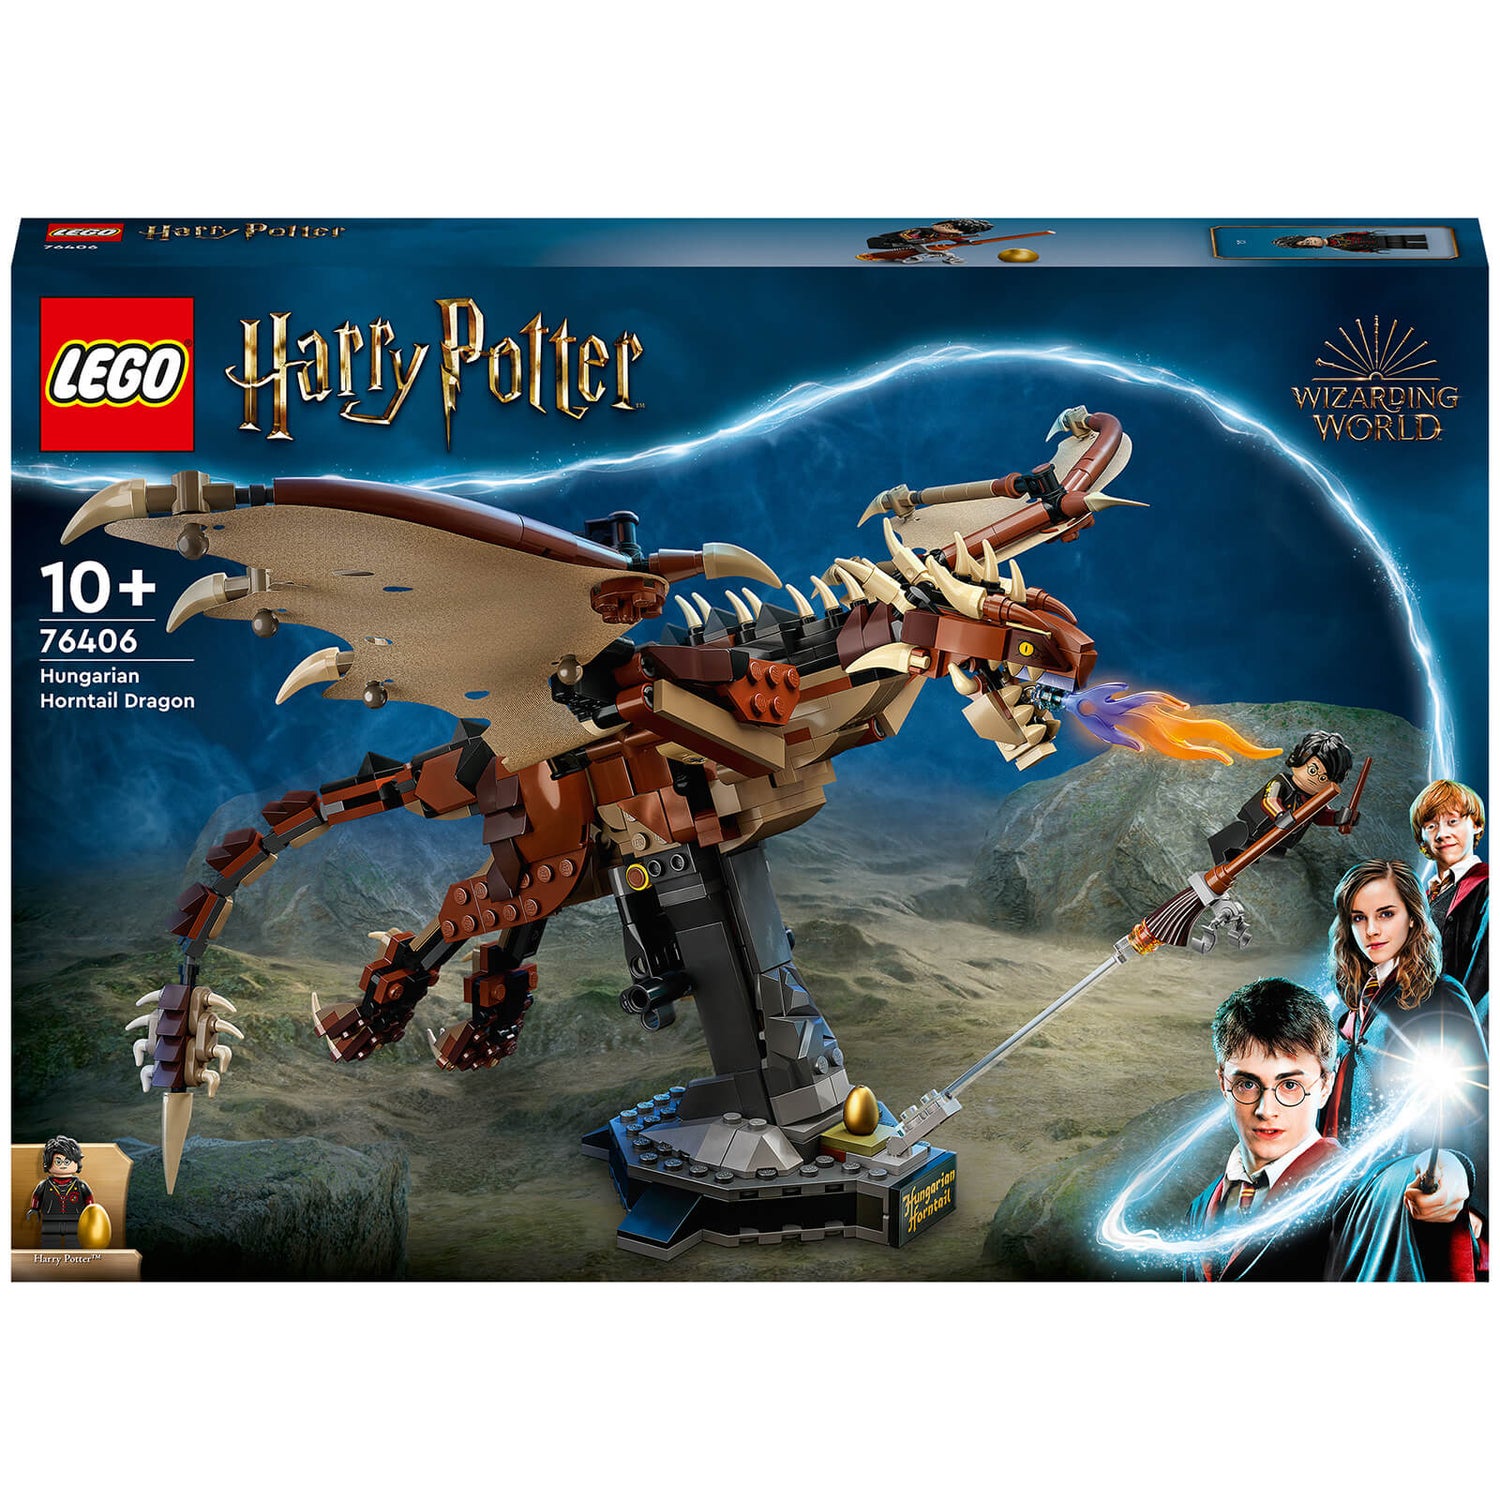 LEGO Harry Potter: Hungarian Horntail Dragon Toy Model (76406)